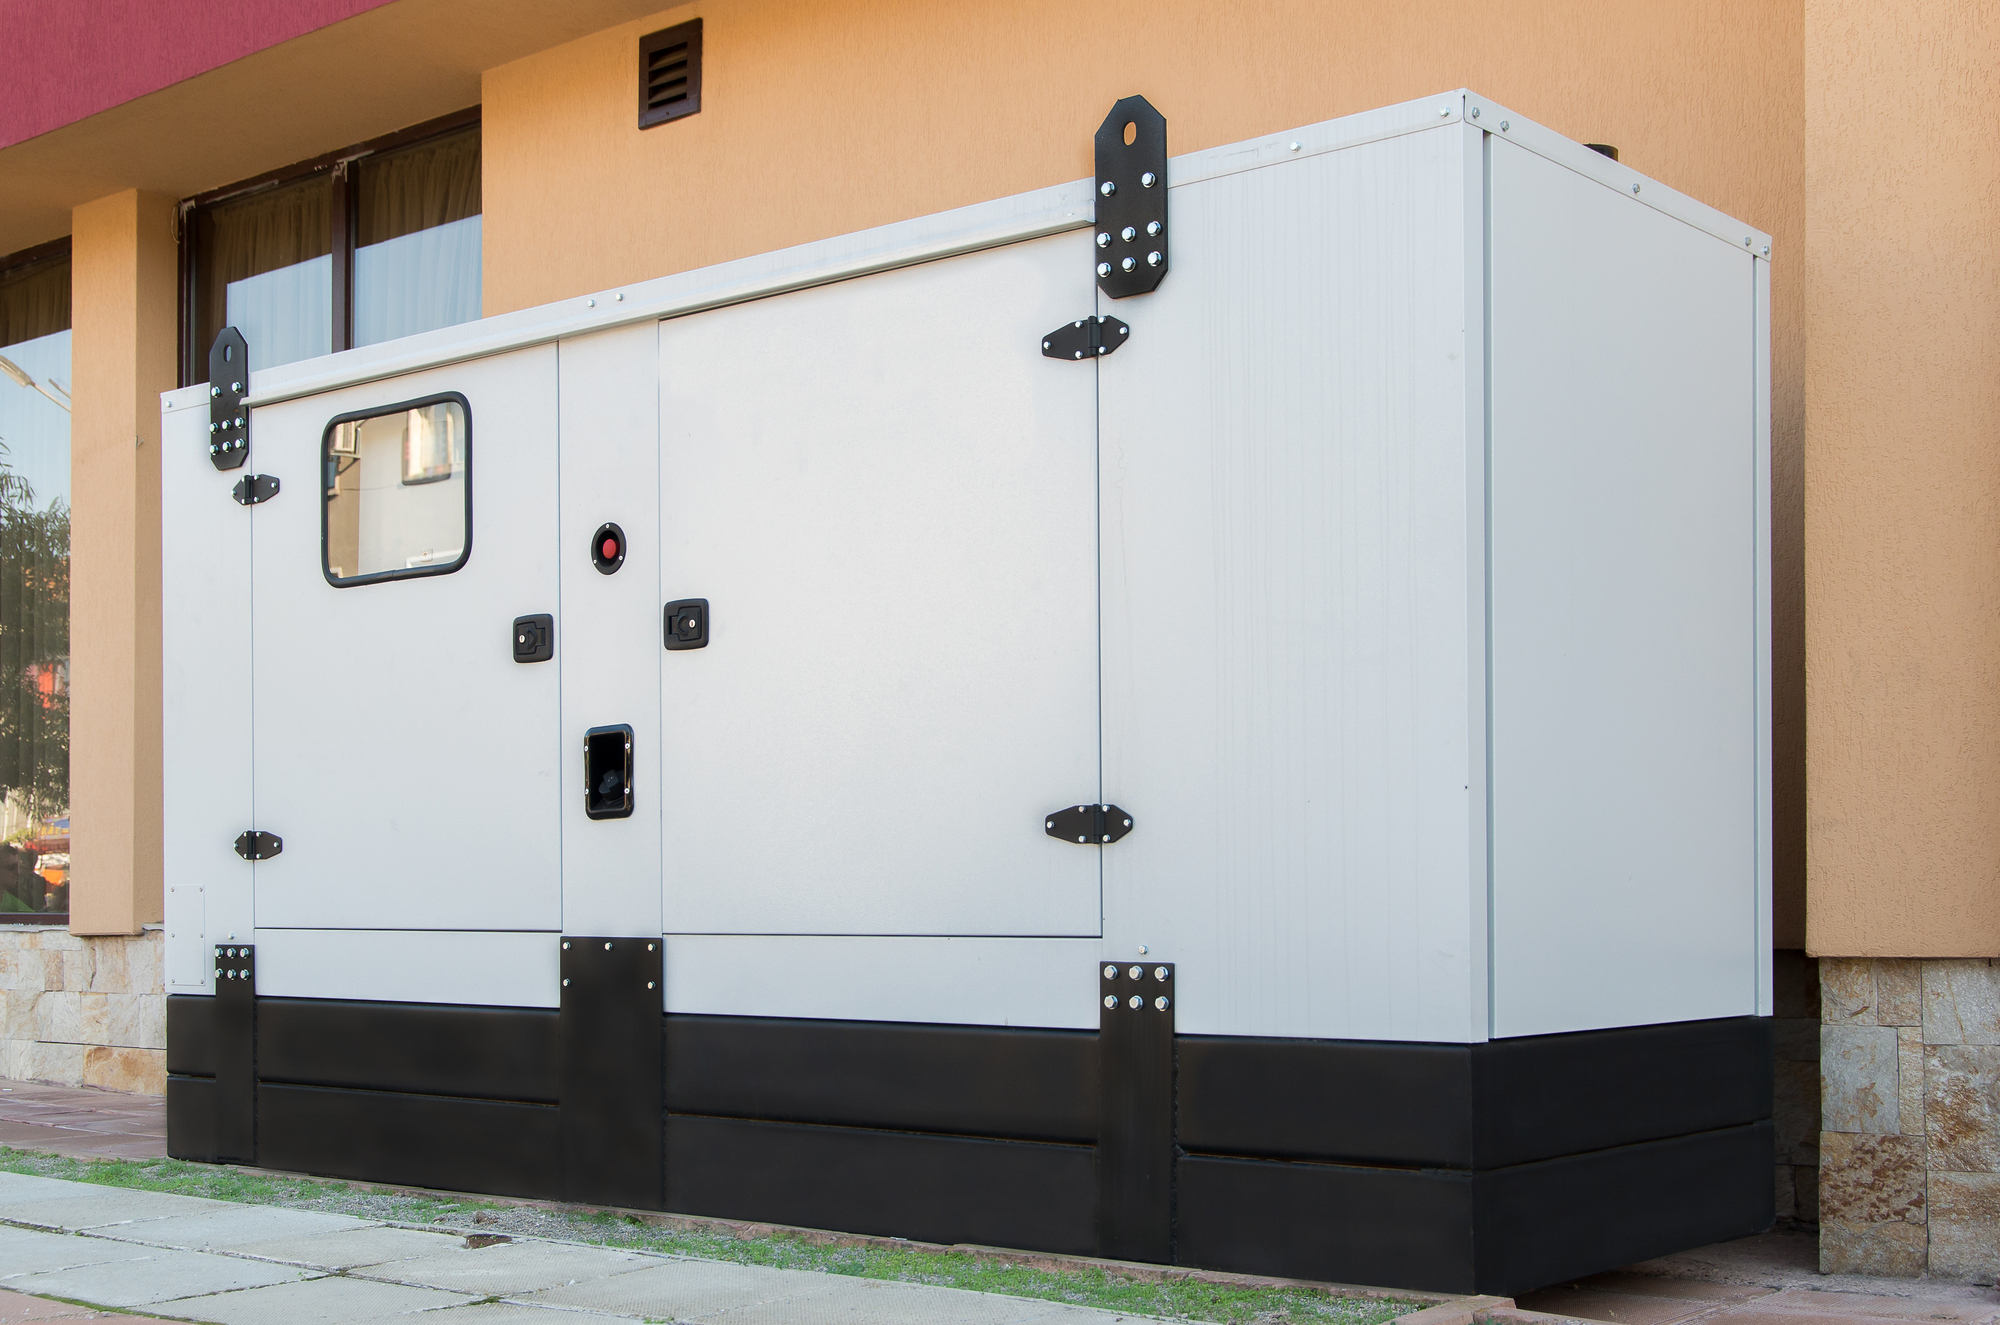 A large, stationary home generator installed outside a residential building